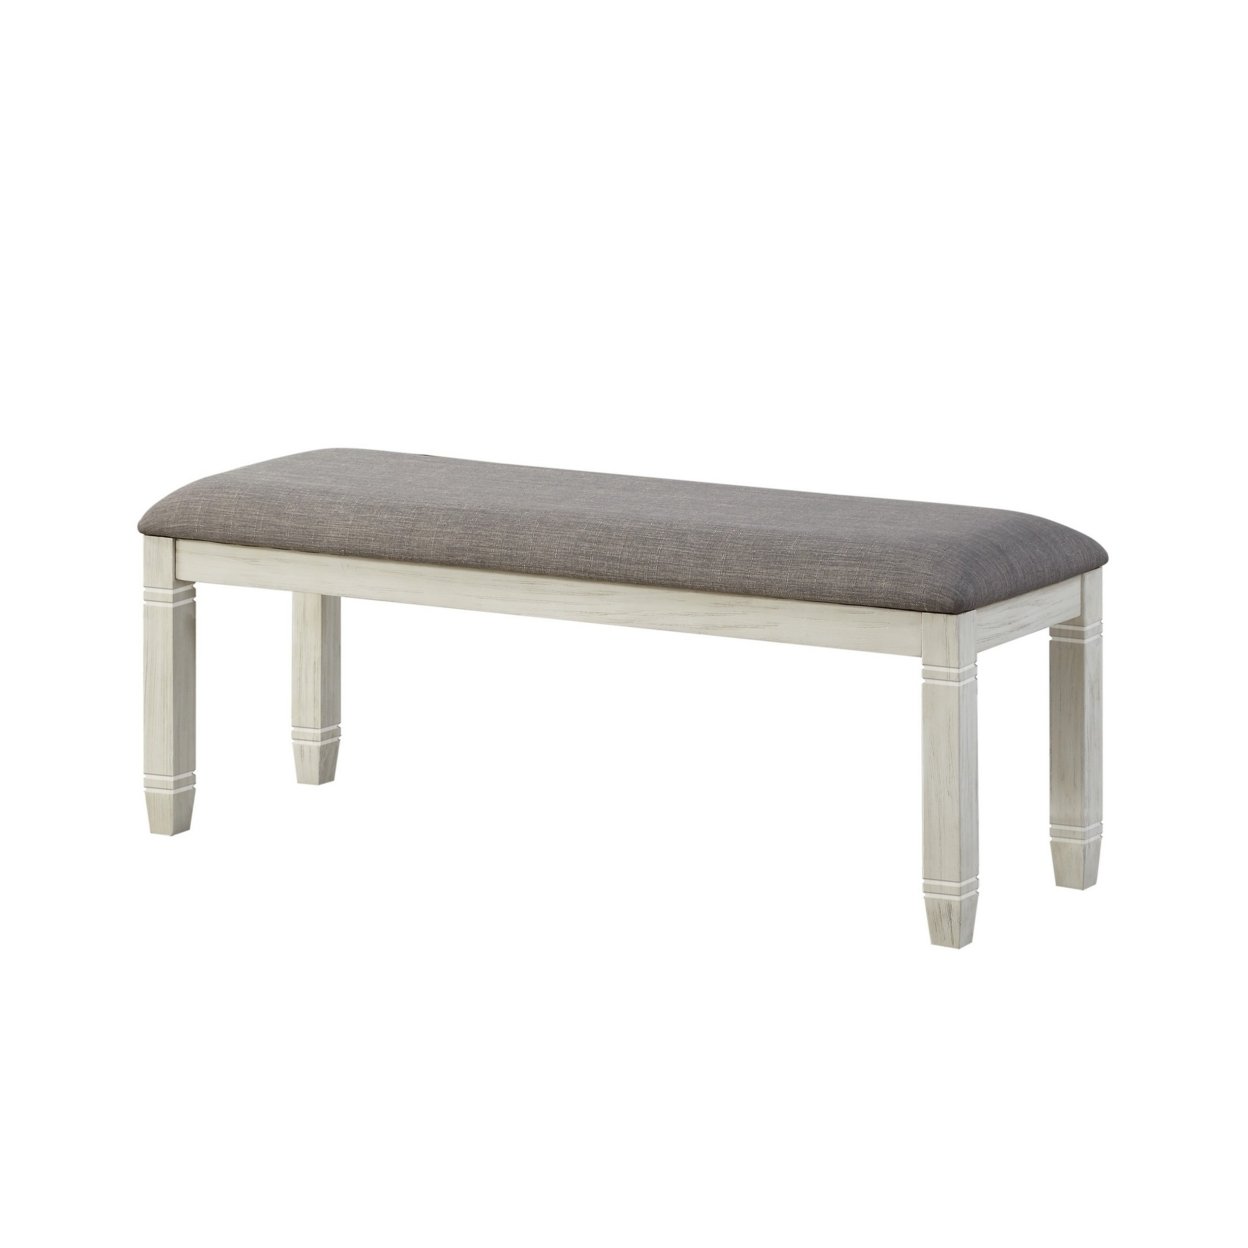 Fabric Upholstered Padded Bench With Tapered Feet, Antique White And Gray- Saltoro Sherpi